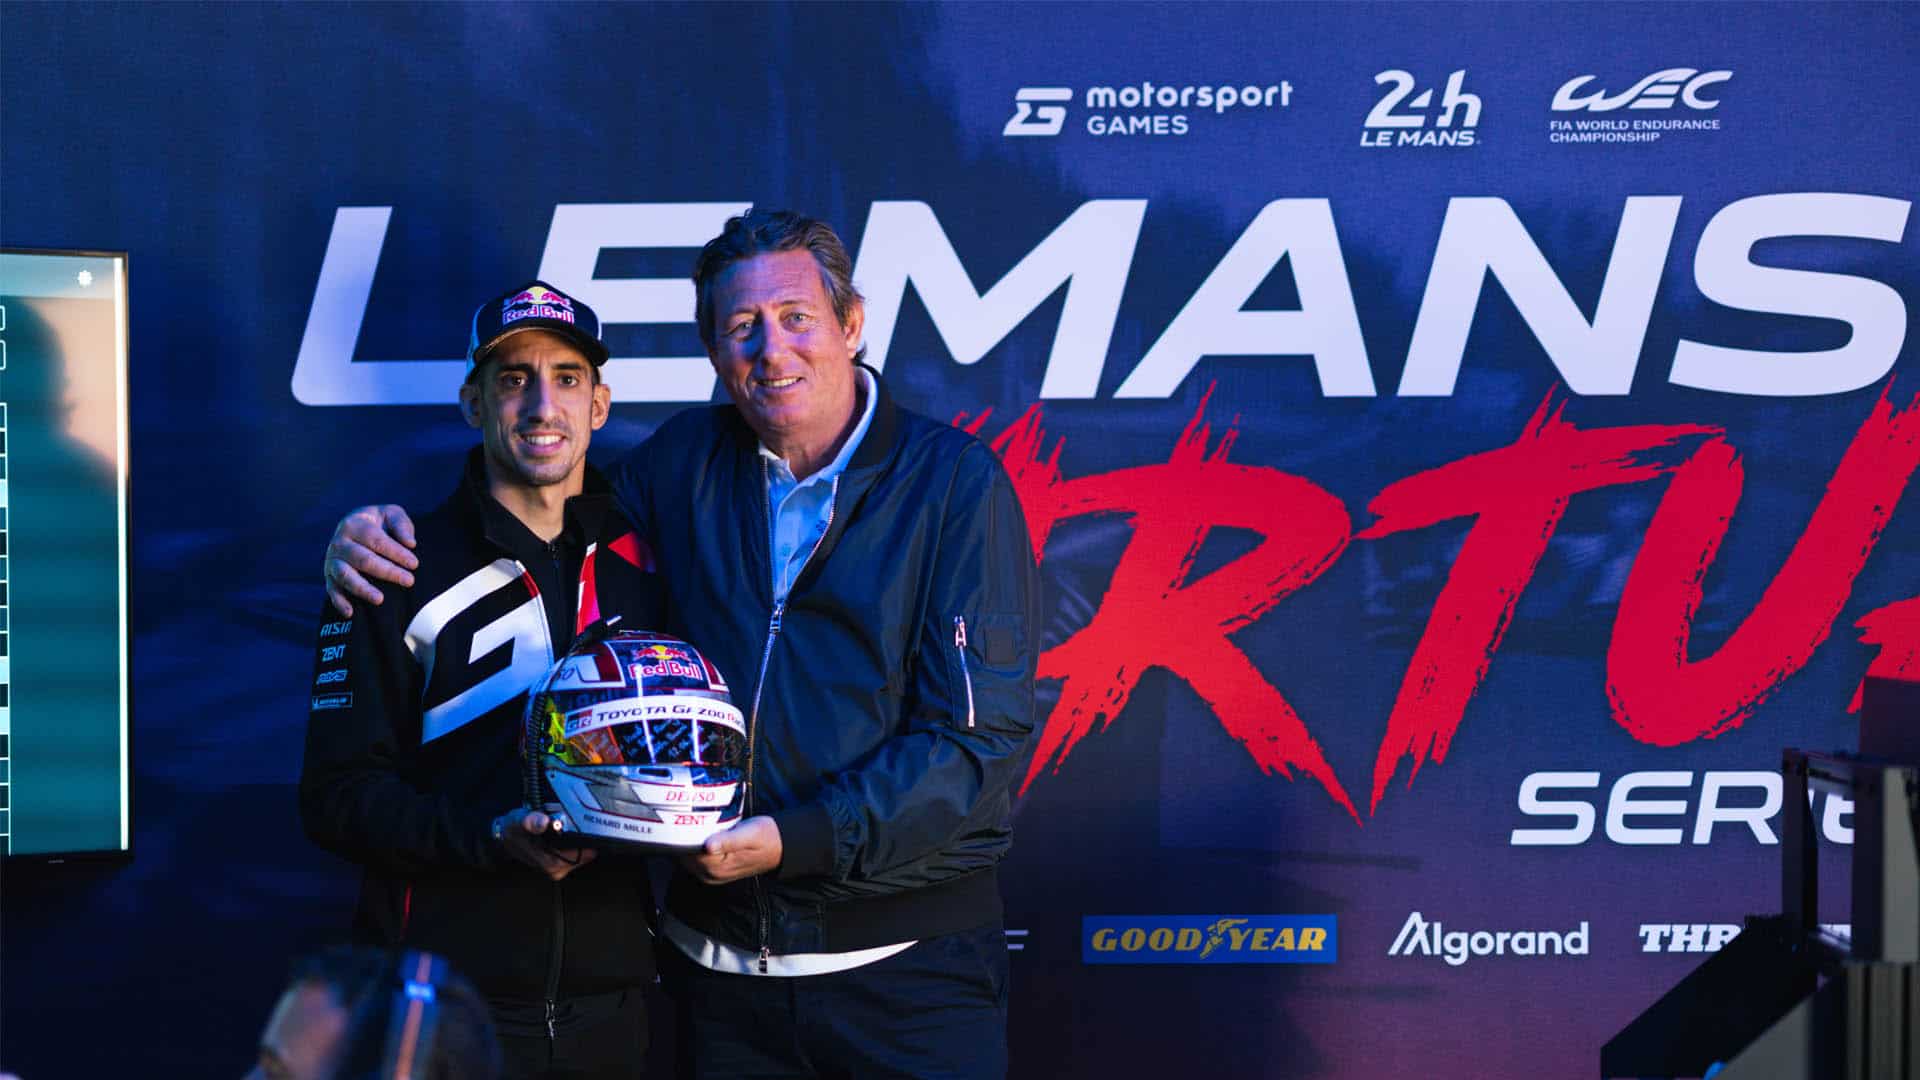 Le Mans Virtual 2023 will be packed with “exciting entertainment” and surprises